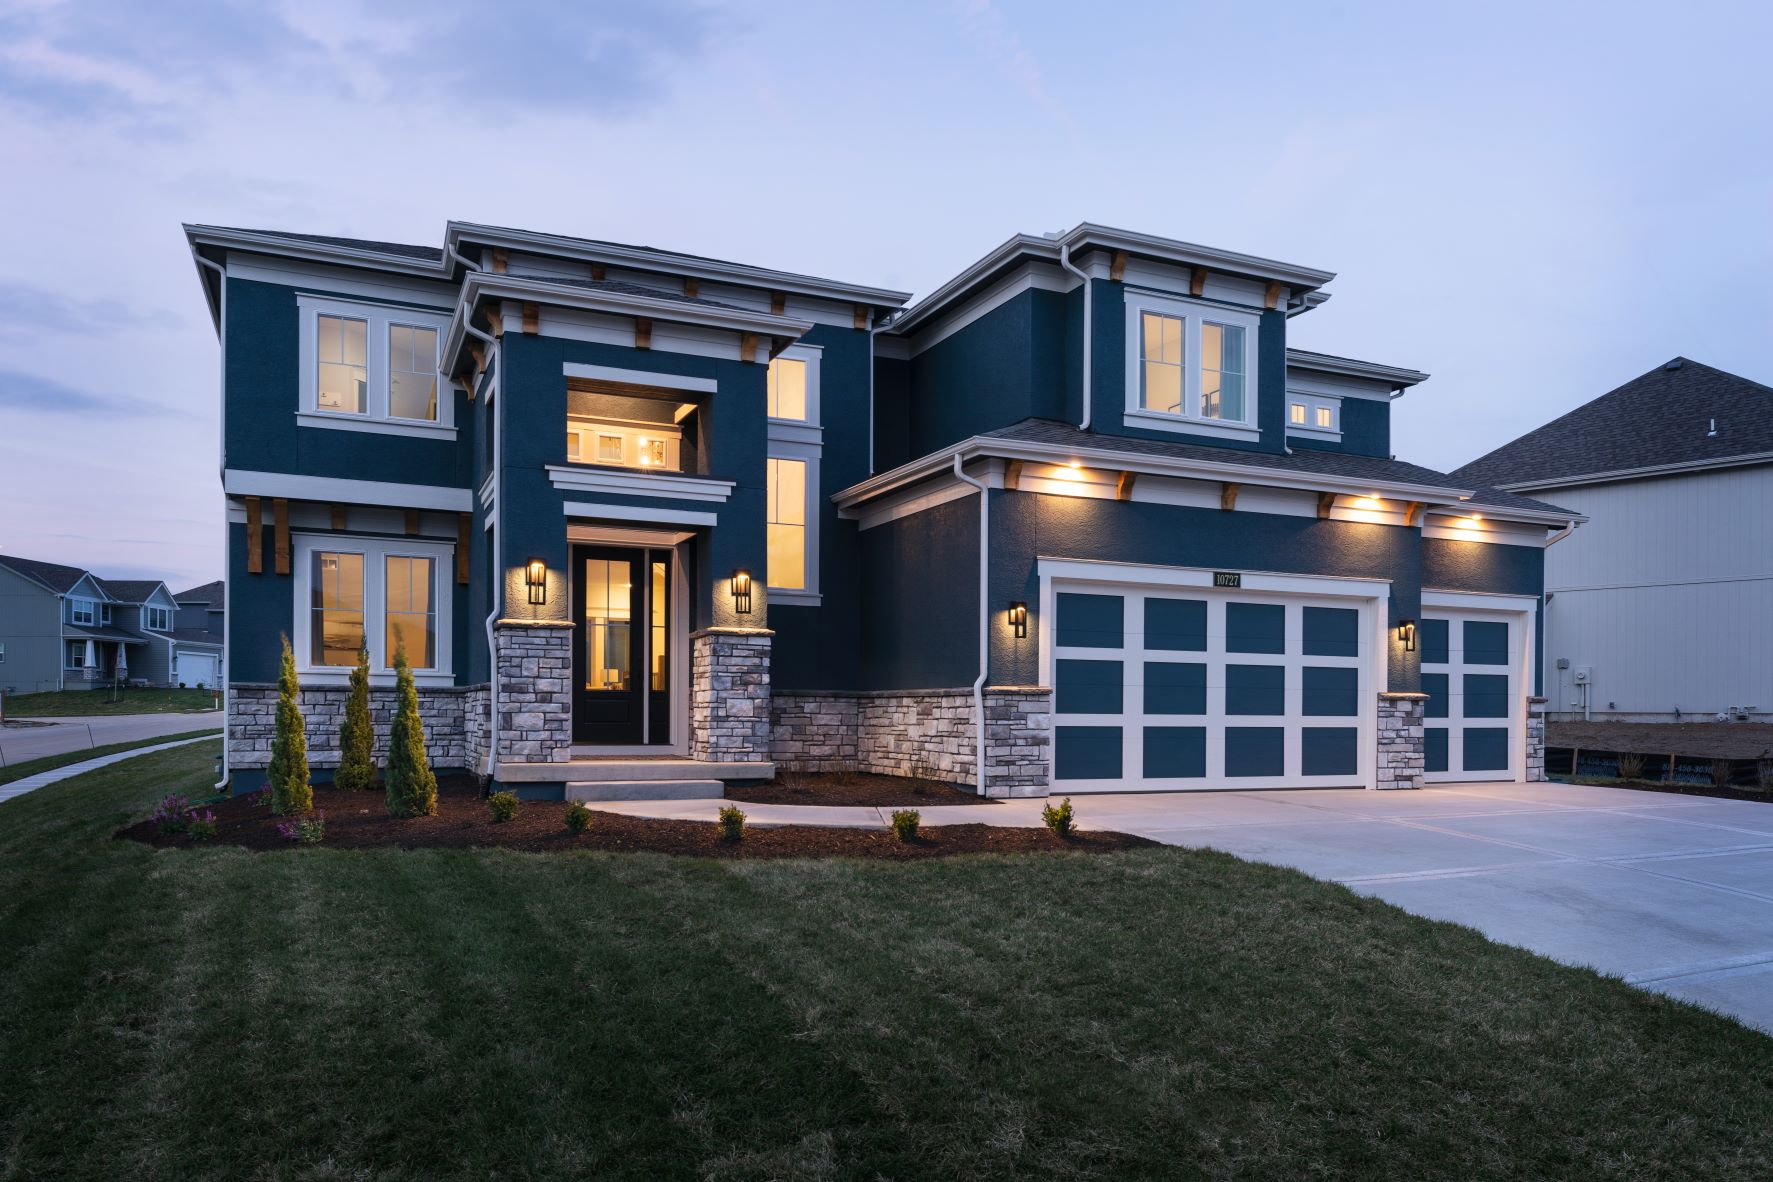 Patriot Homes Kennedy 2-story floor plan available in Cadence new home community